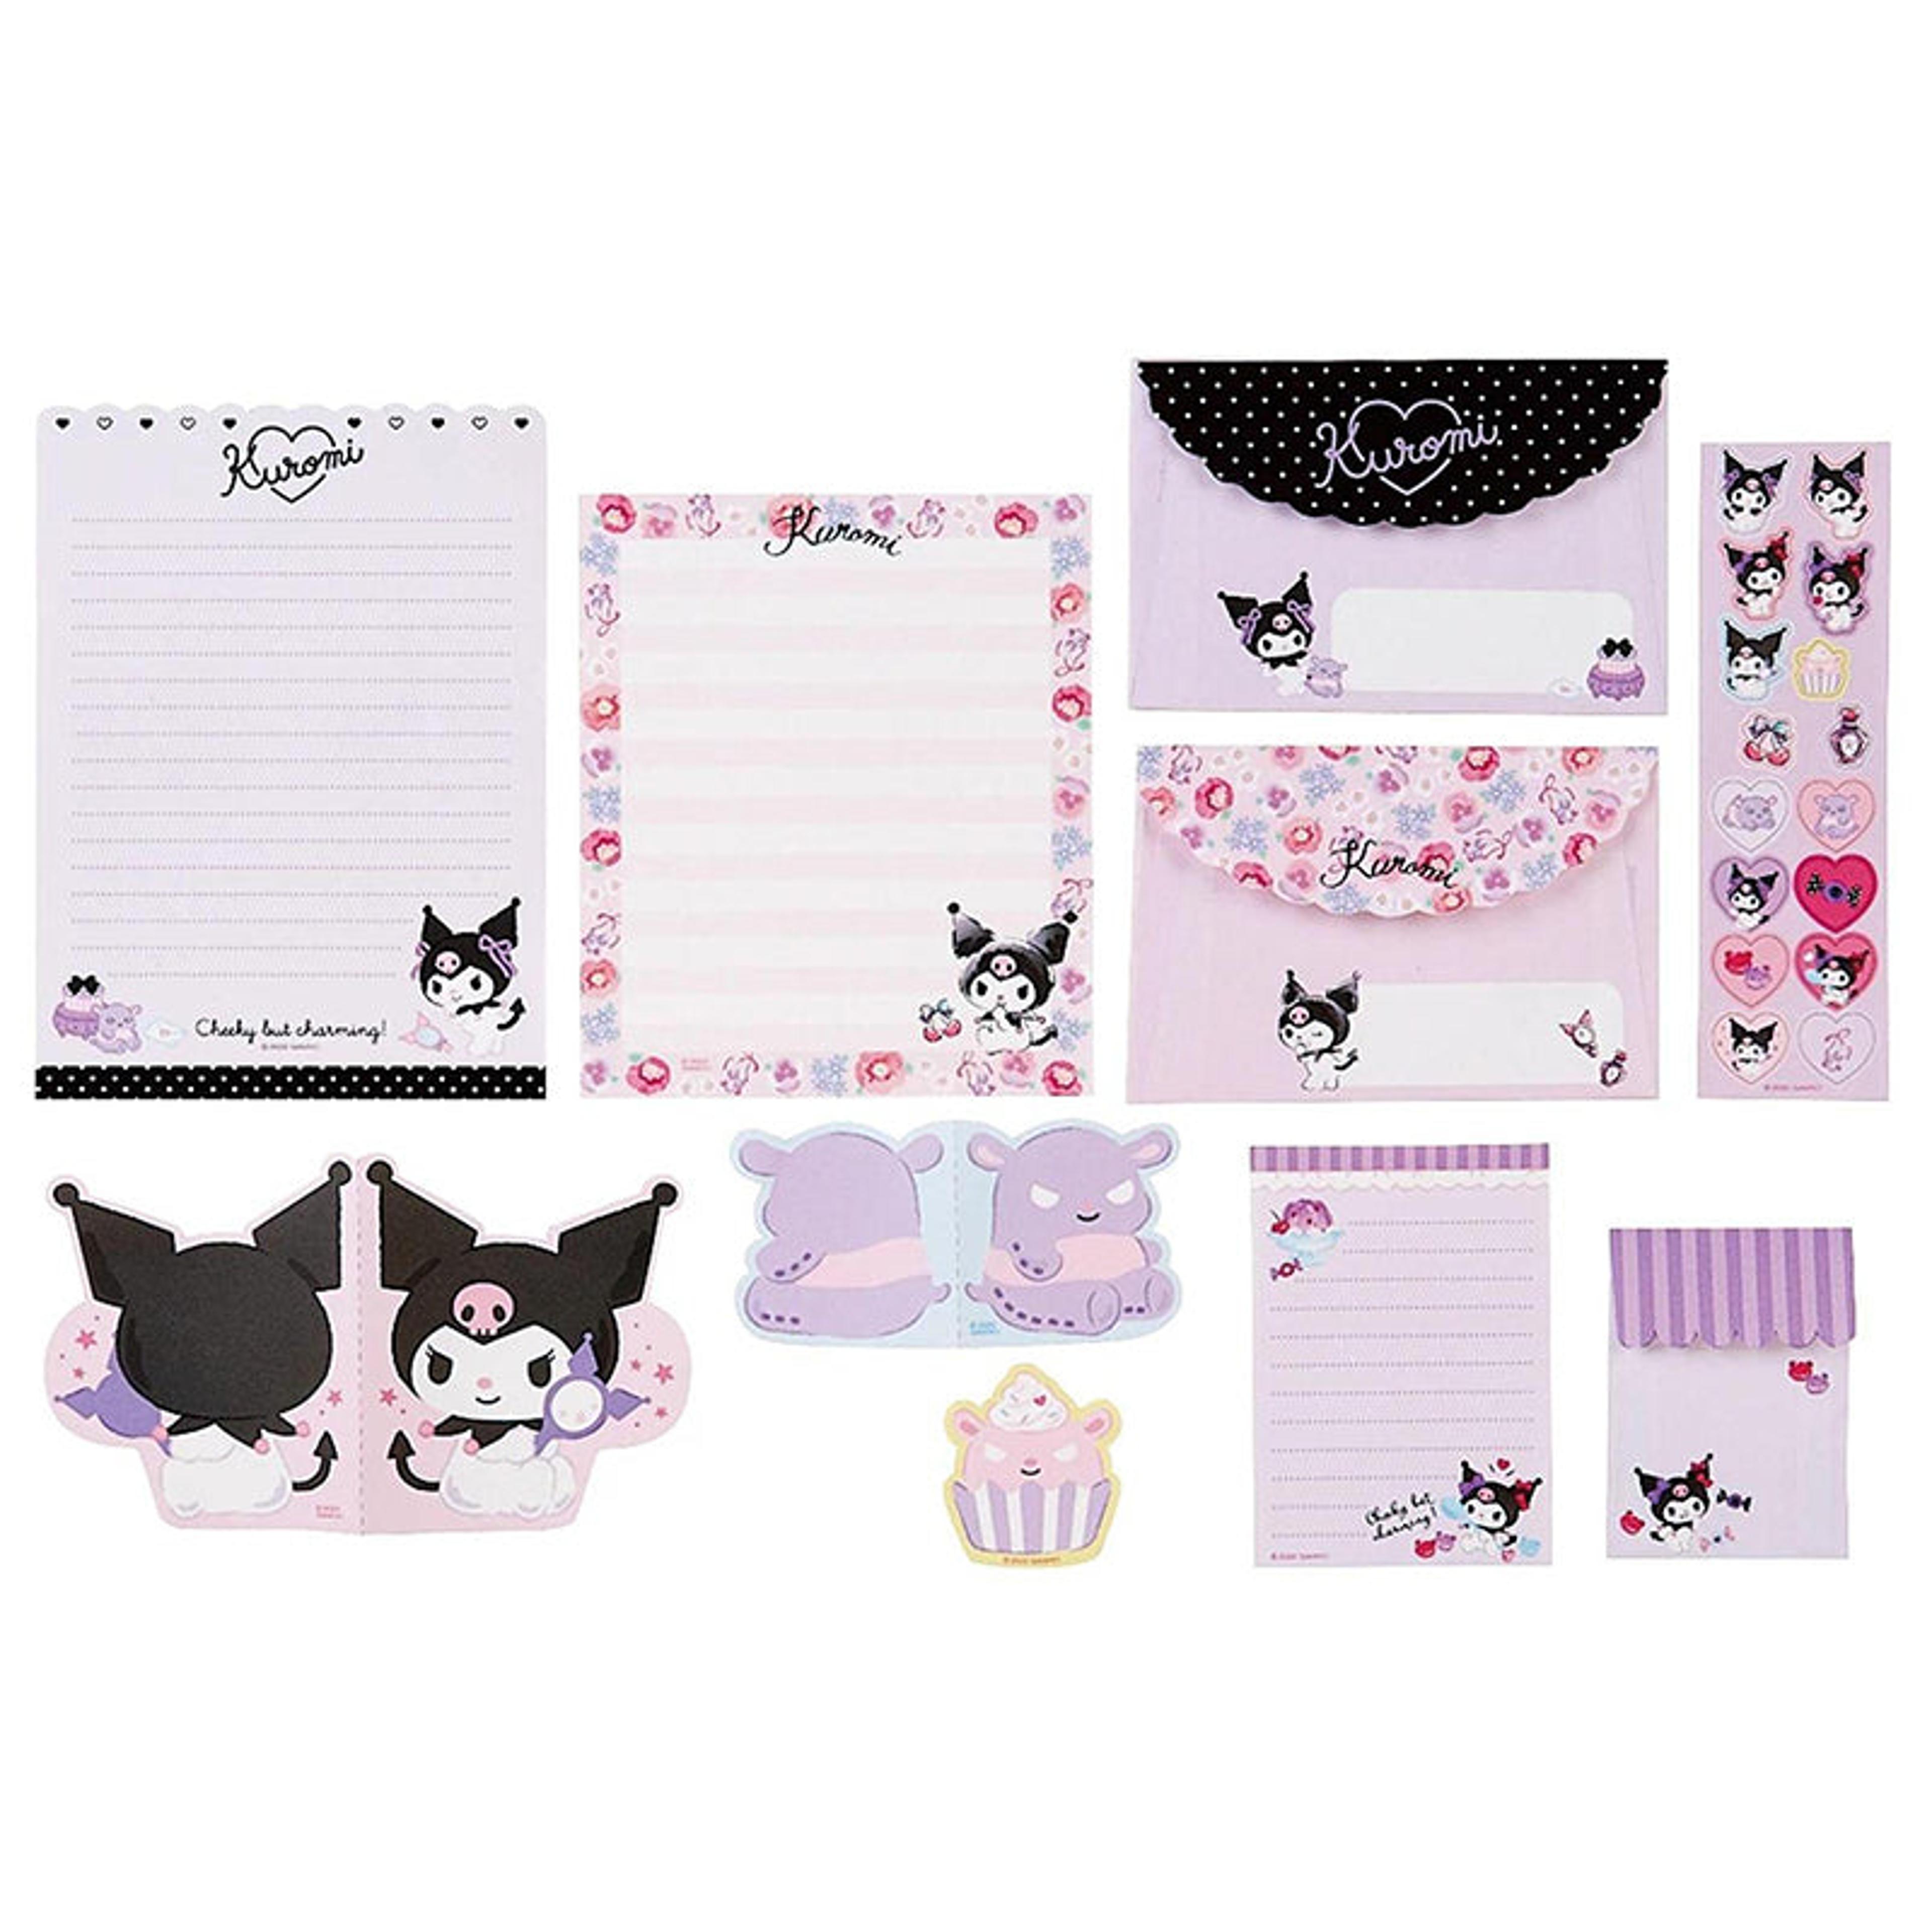 Alternate View 10 of Sanrio Character Variety Letter Set